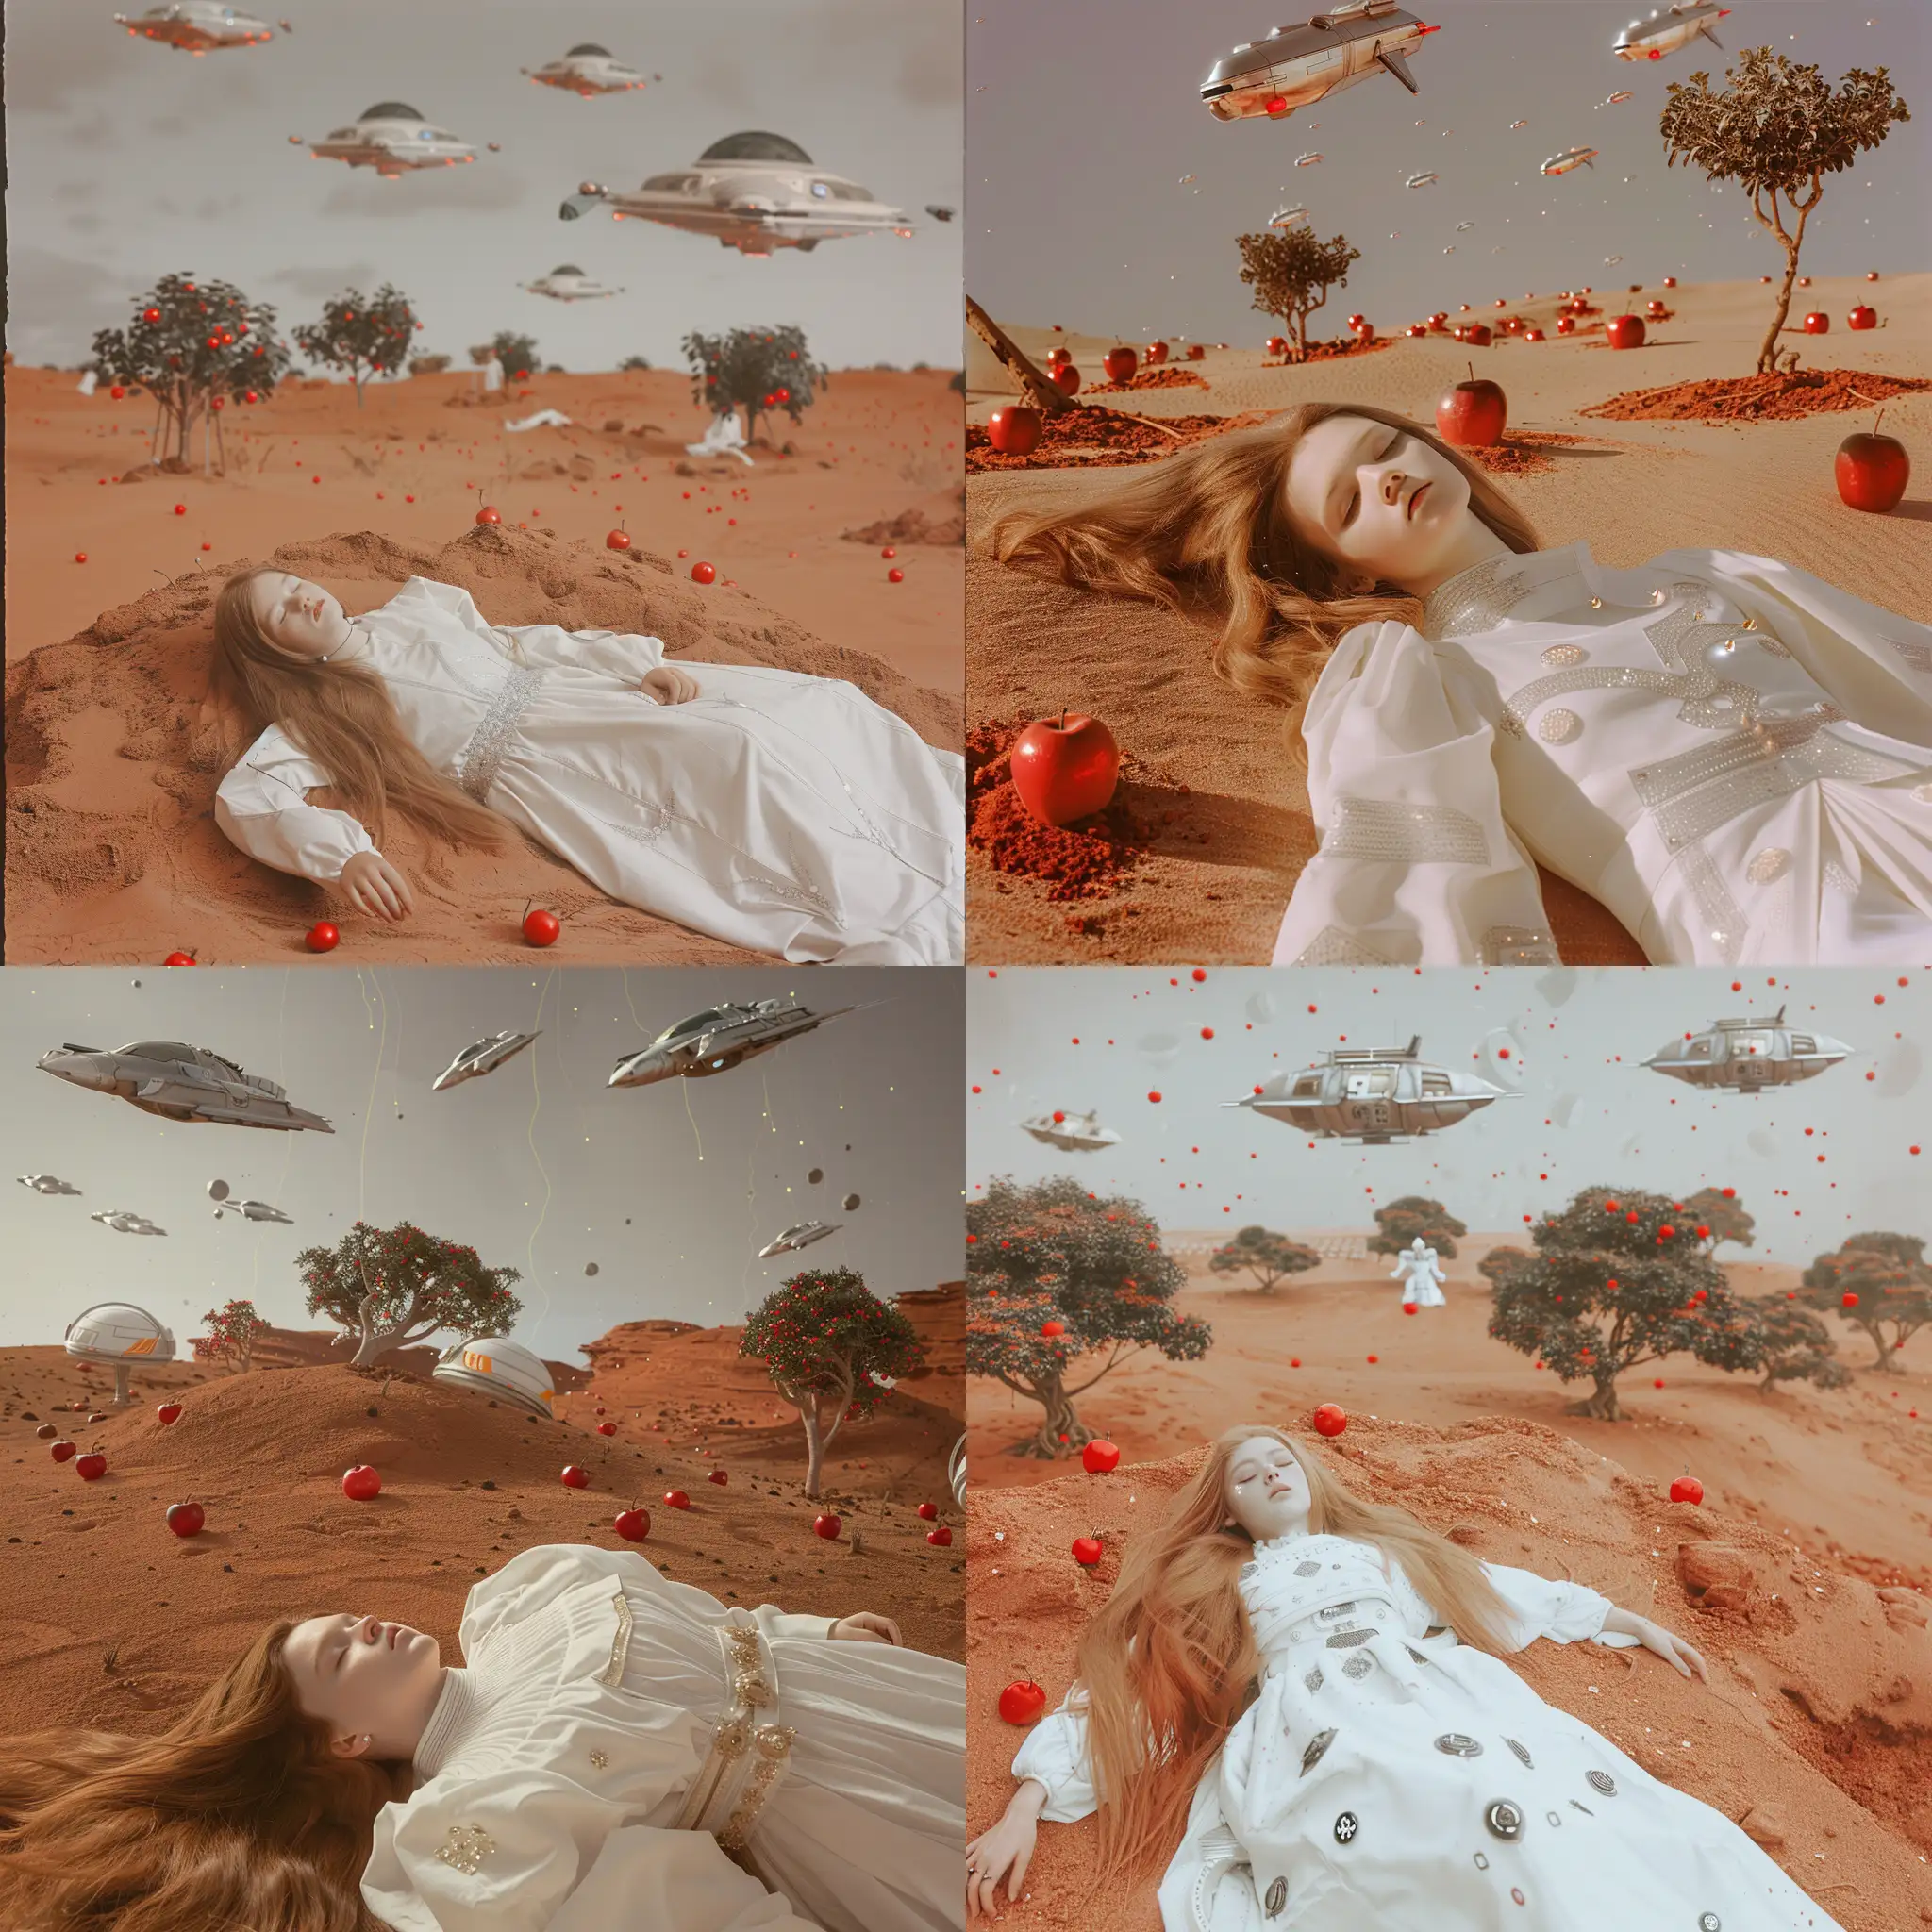 Girl-in-White-Costume-on-Red-Sandy-Planet-with-Spaceships-and-Apple-Trees